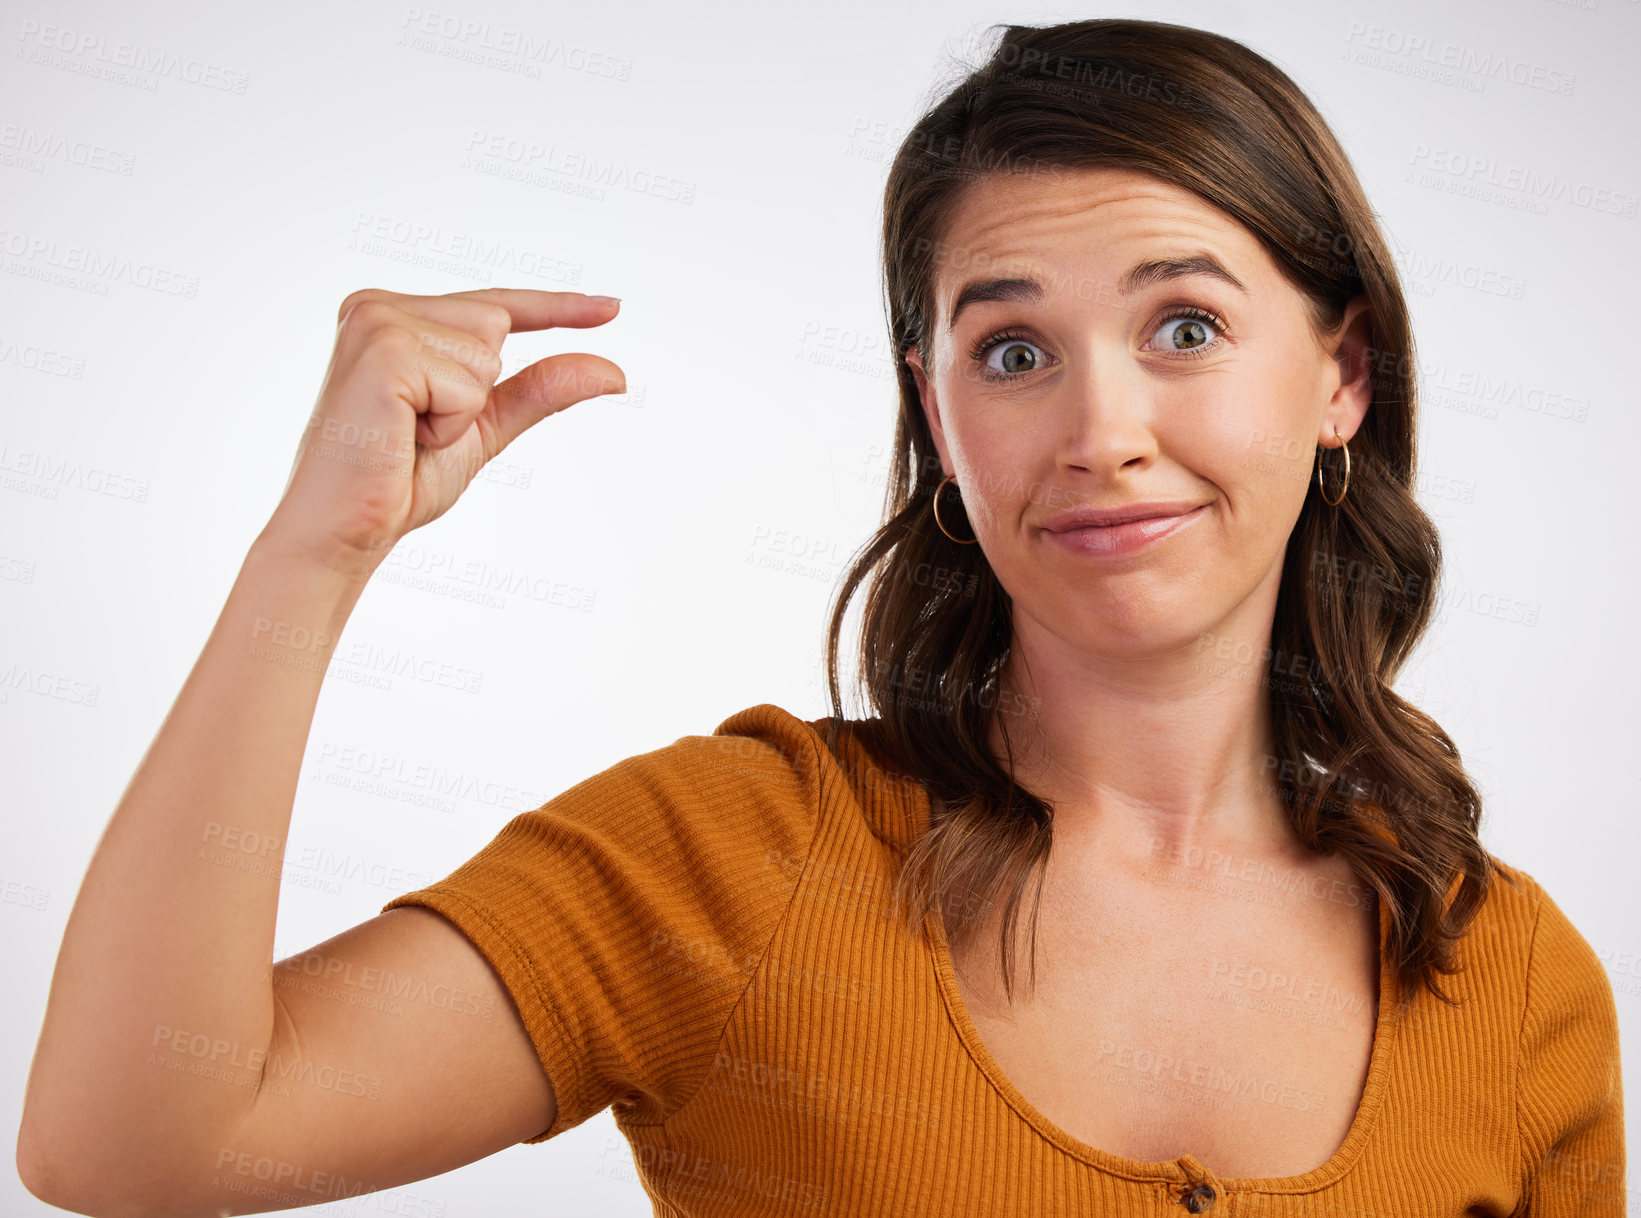 Buy stock photo Studio shot of a young woman gesturing a small size with her hand against a white background